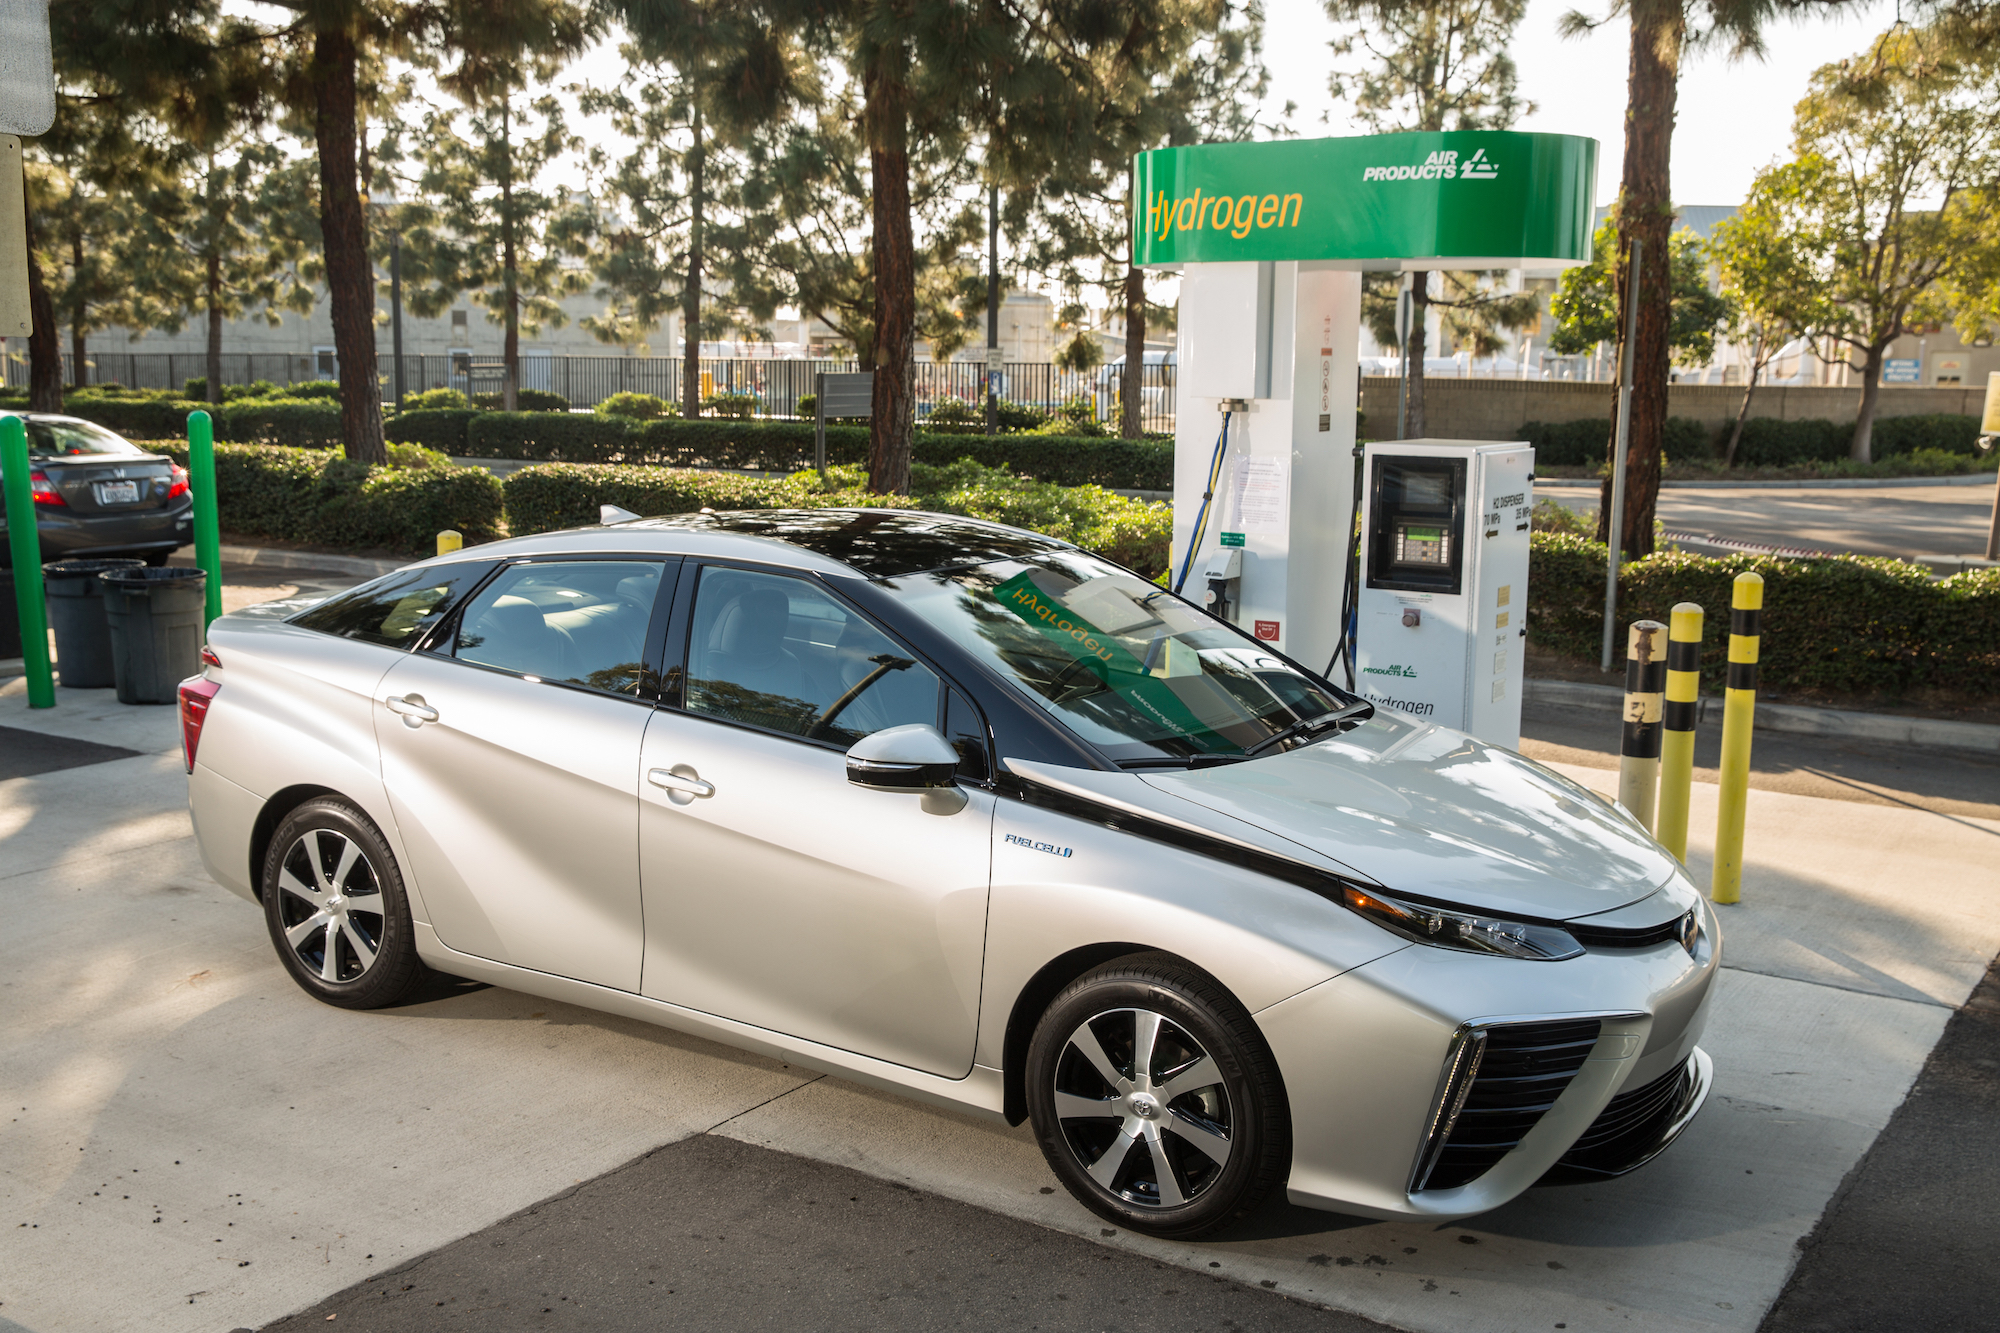 Hydrogen Fuel Cell Vehicles: Pros and Cons